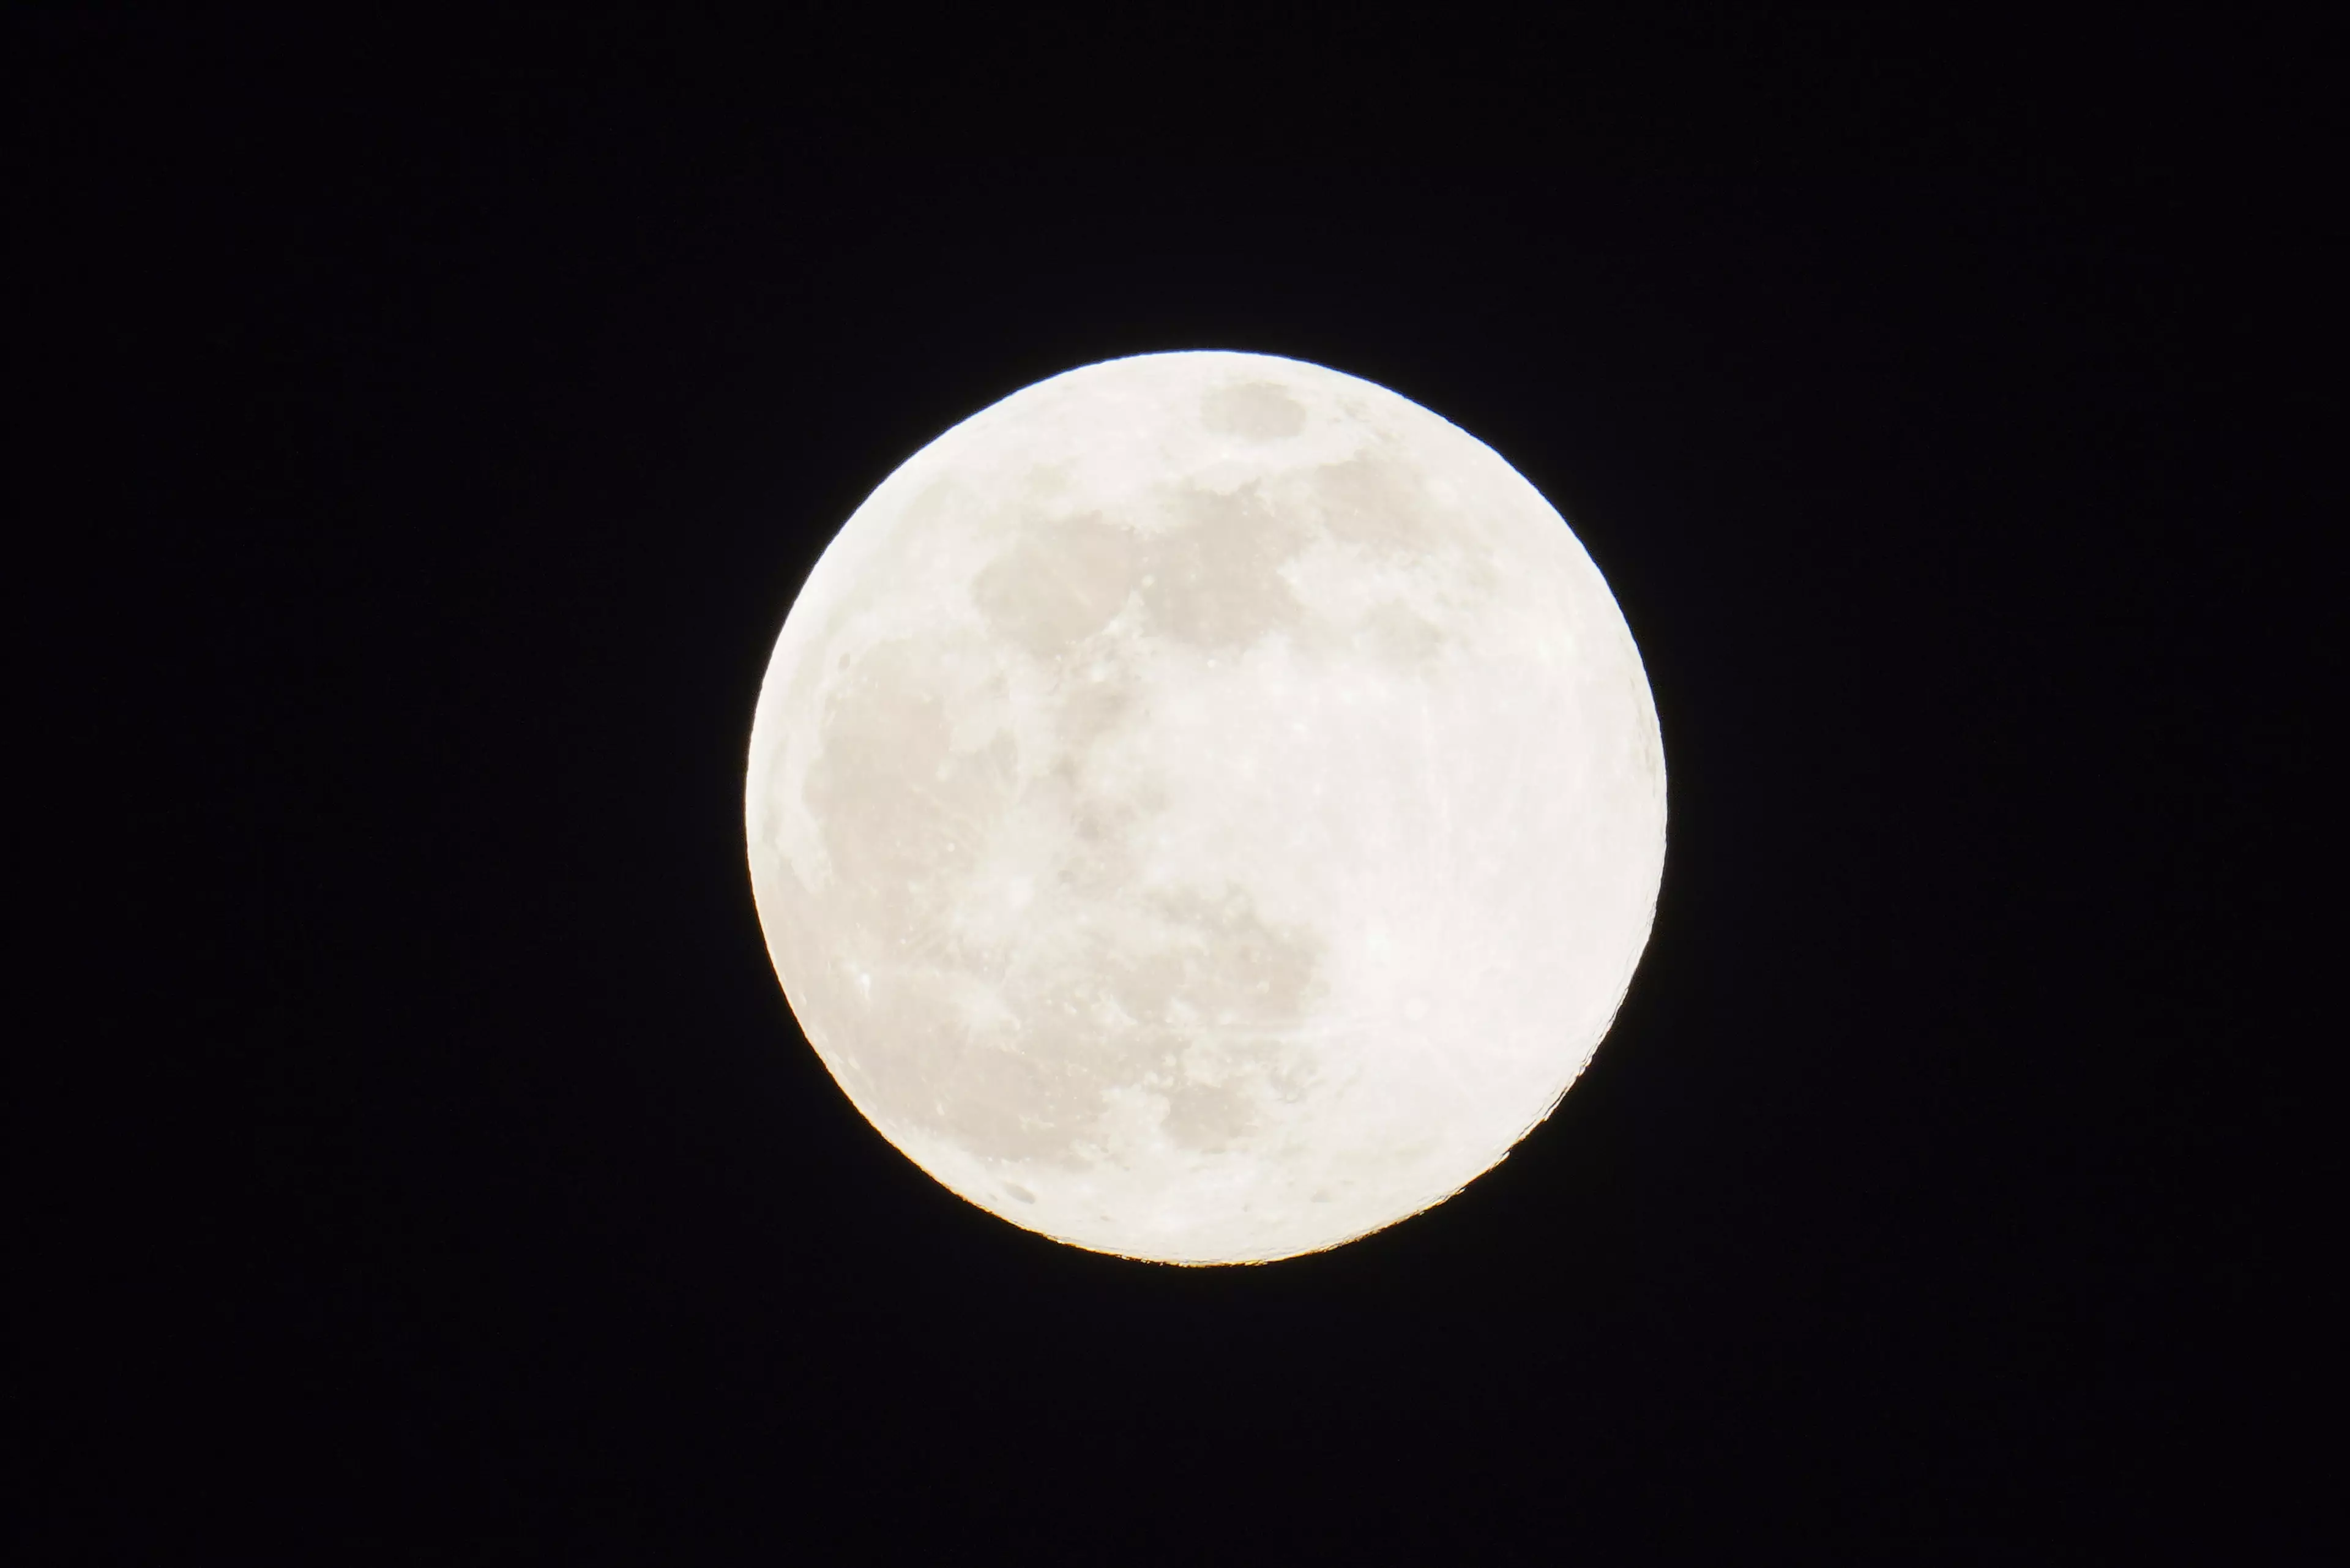 The Moon becomes a Supermoon when it reaches its perigee - the point closest to the Earth's orbit (